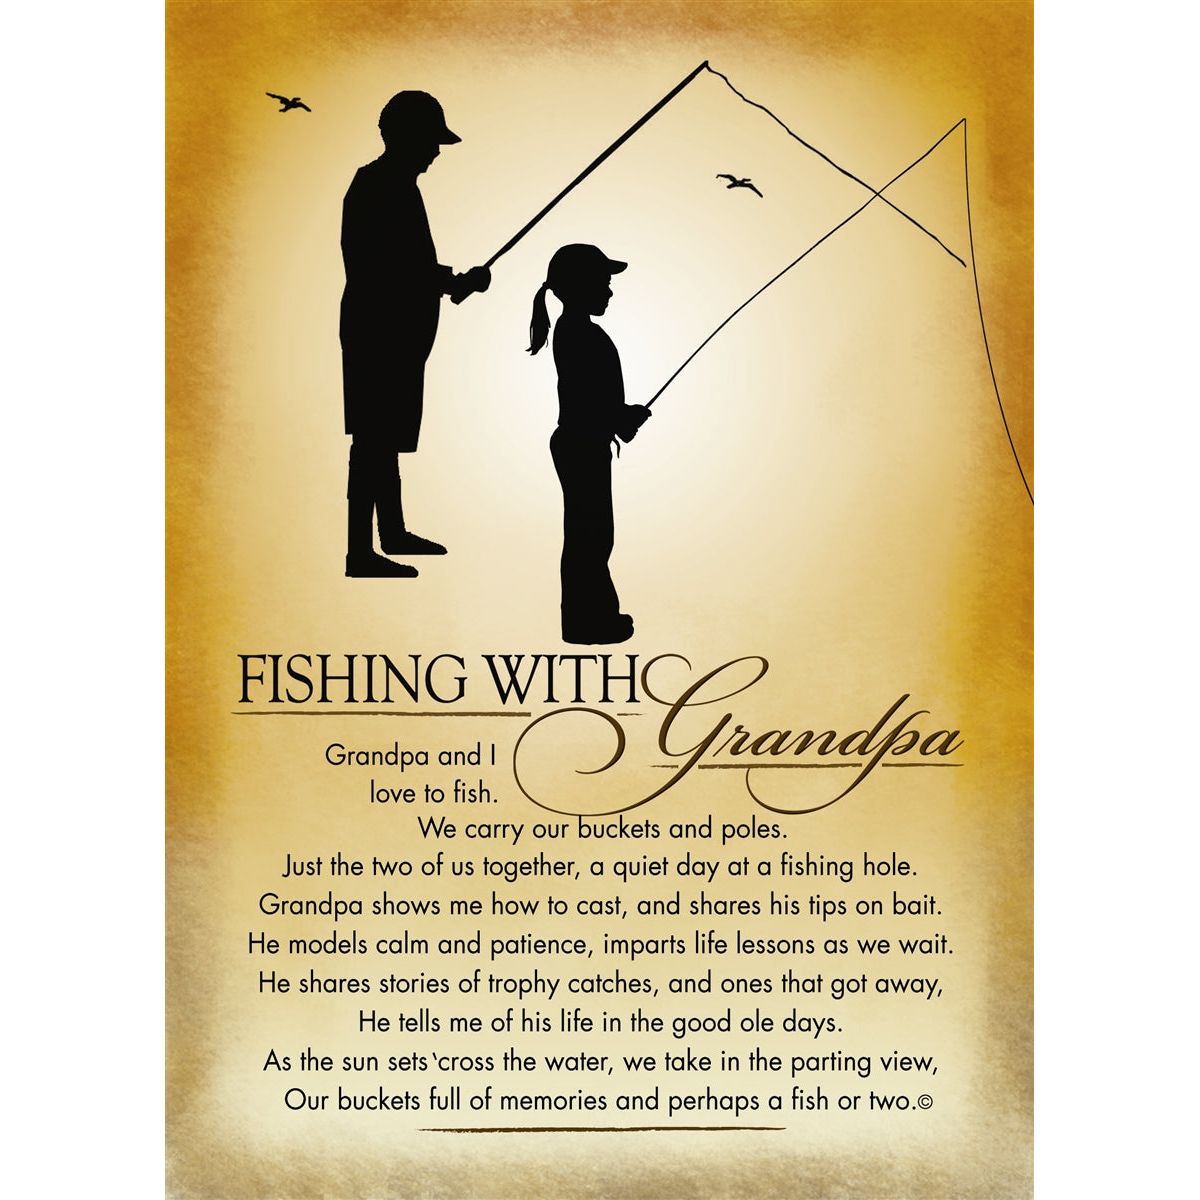 Fishing with Grandpa artwork with poem.